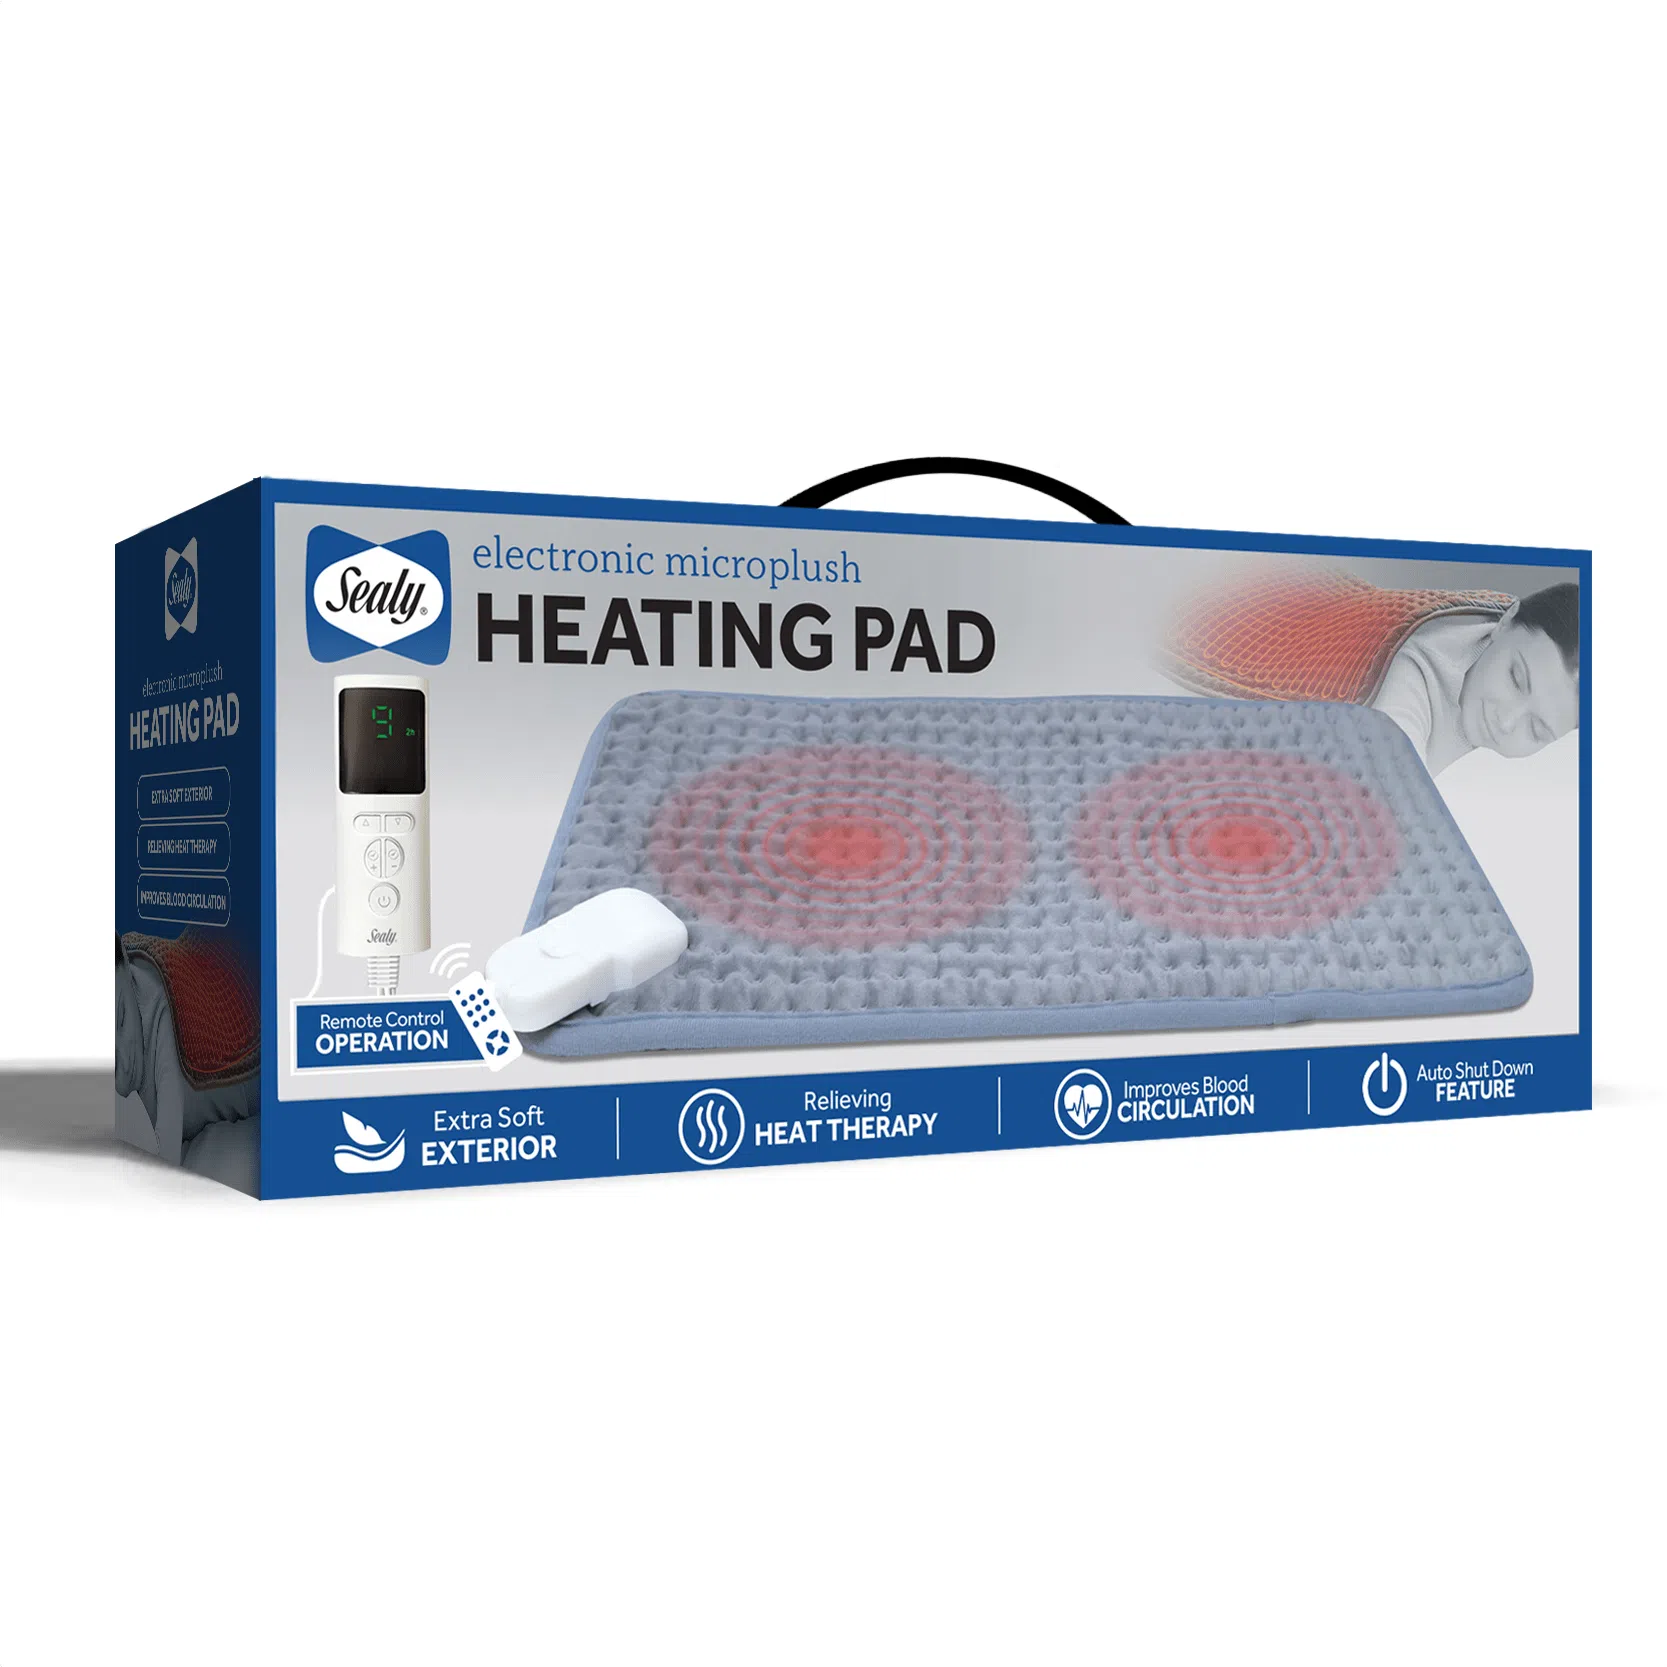 Sealy Electronic Microplush Heating Pad, Microplush heating pad, Electric heating pad, Sealy heating pad, Heating pad for pain relief